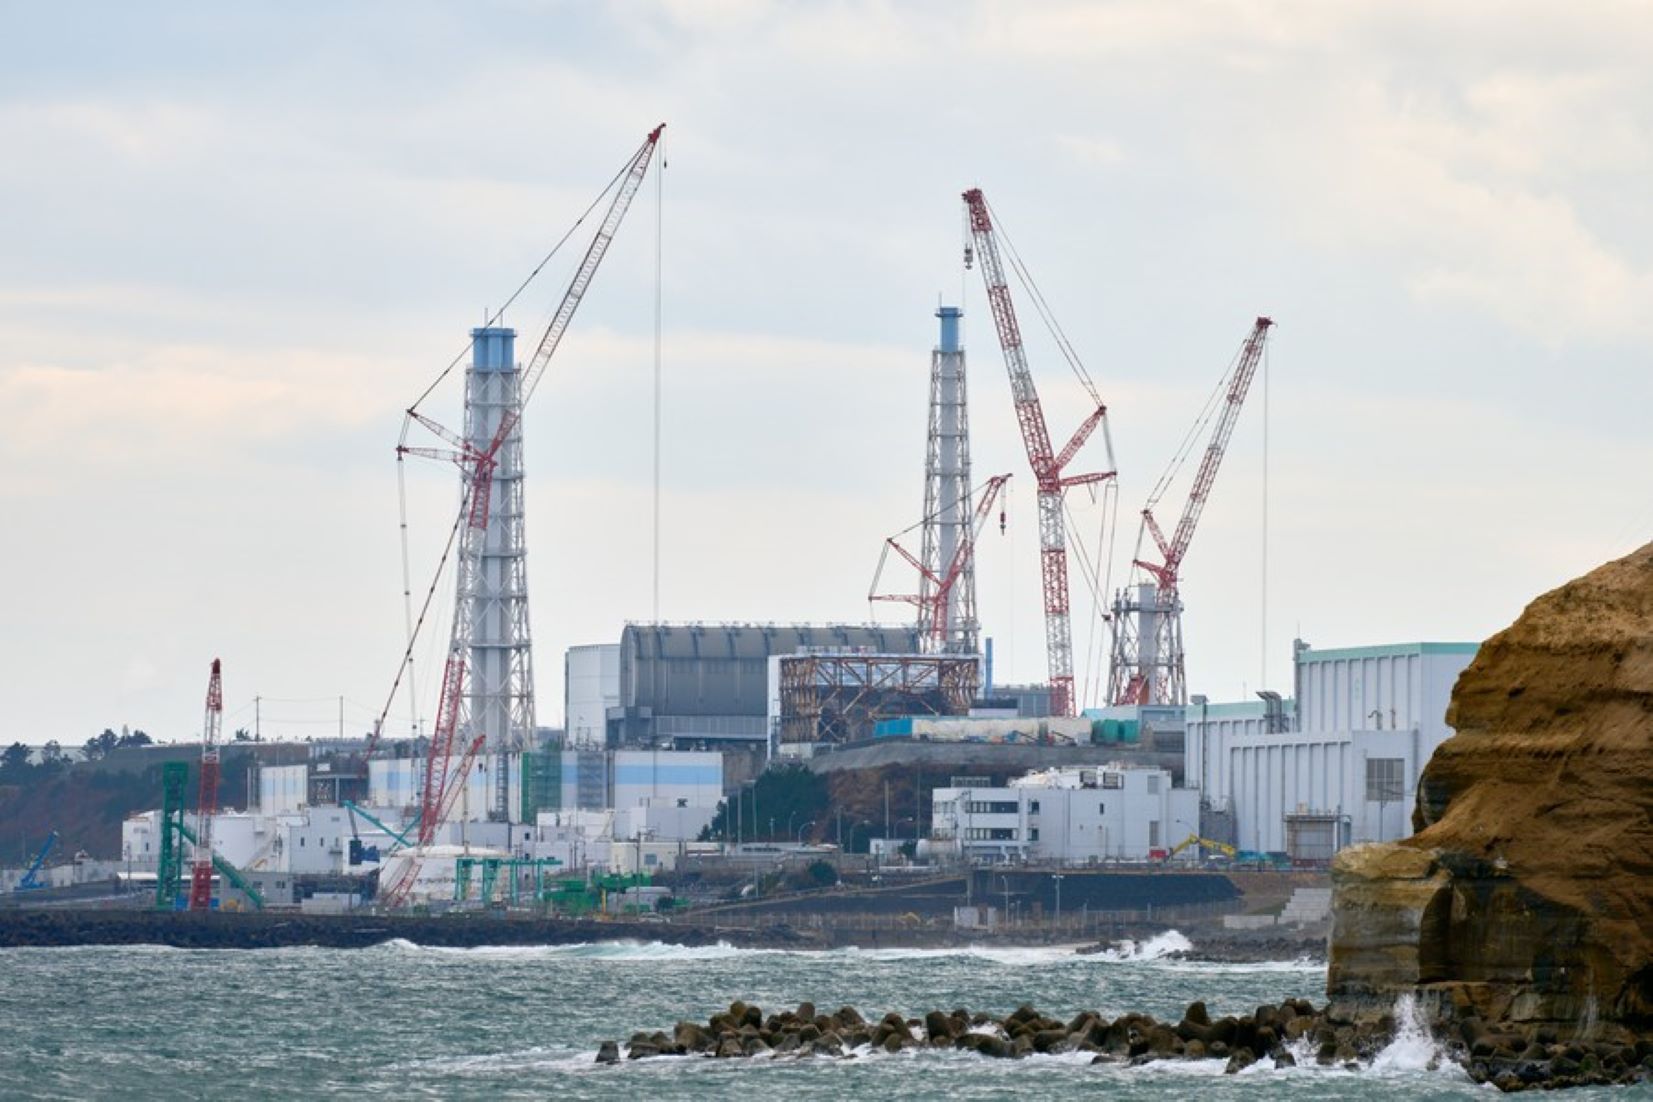 Japan’s Nuclear Regulator Finished Inspection Of Fukushima Nuclear-Contaminated Water Release System